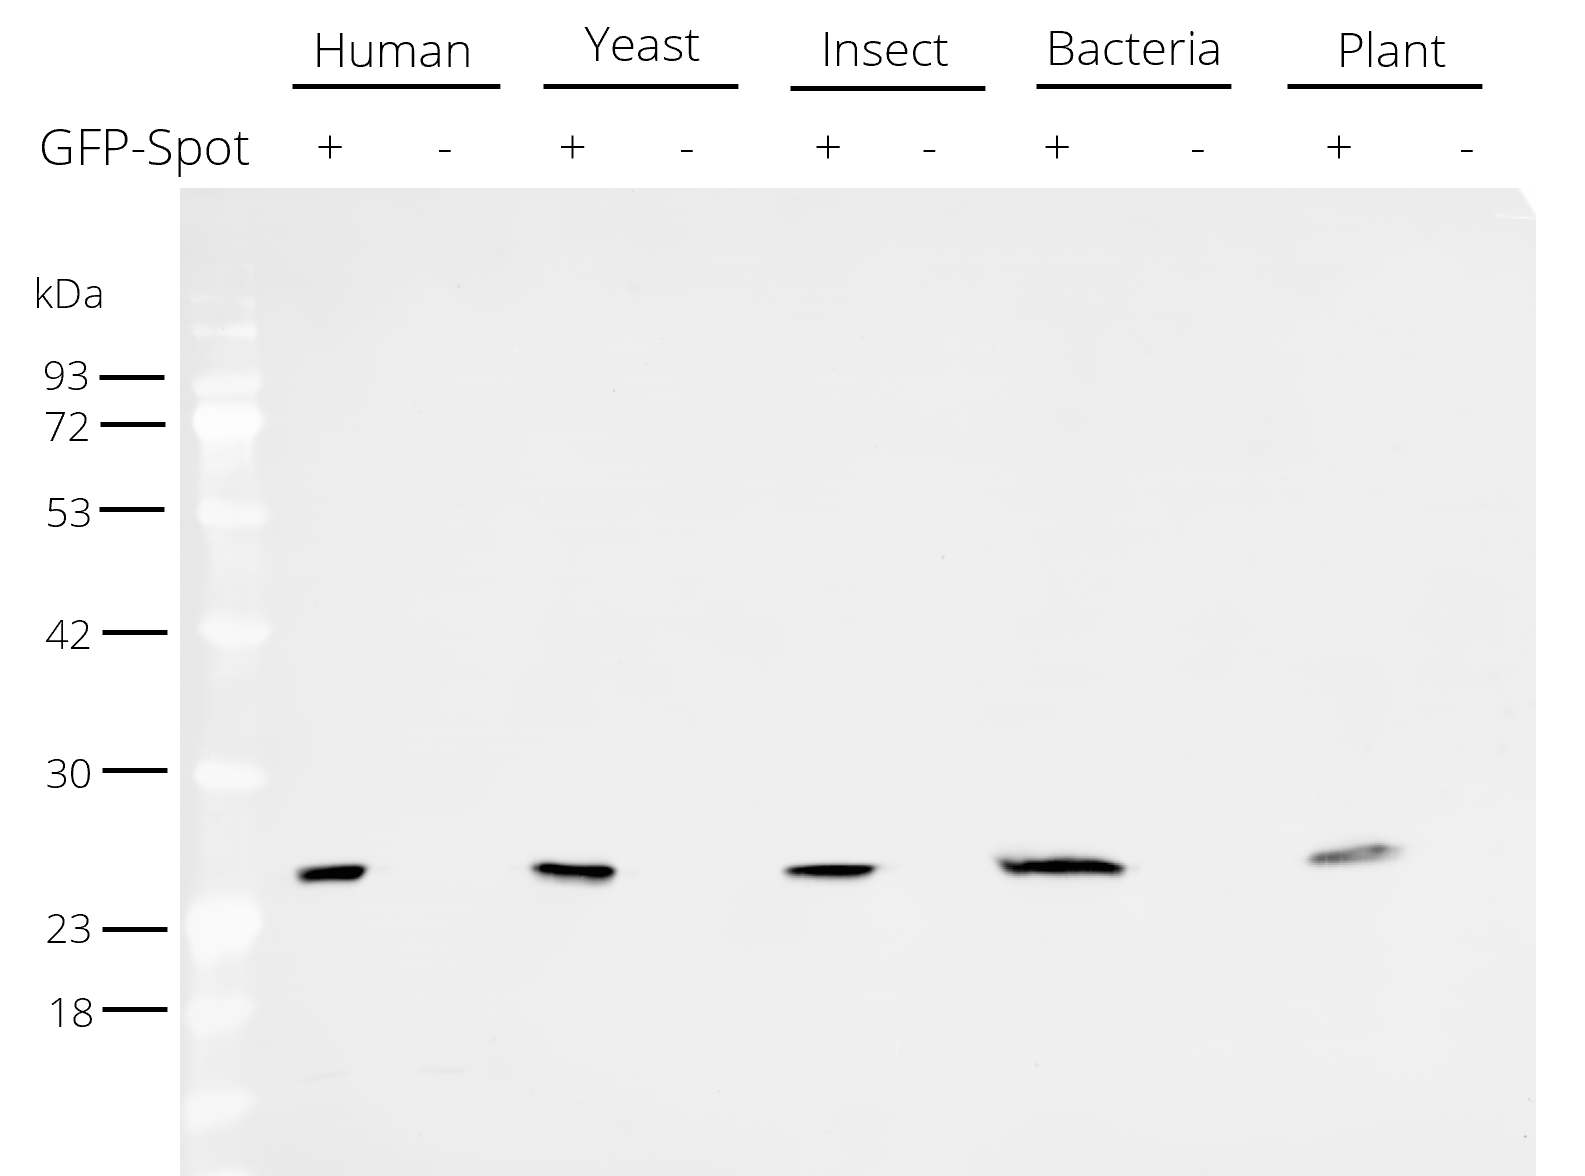 Western blot analysis of different cell lysates +/- 50 ng C-terminal Spot-tagged GFP: human (HEK-293T), yeast (S.cerevisiae), insect (High Five™), bacteria (E.coli) and plant (A.thaliana). Detection with Spot-tag® antibody [28A5] (28a5, ChromoTek) 1:5,000 and Nano-Secondary® alpaca anti-mouse IgG1, recombinant VHH, Alexa Fluor® 488 [CTK0103, CTK0104] (sms1AF488-1, ChromoTek) 1:5,000. Western blot membrane was incubated simultaneously with the primary antibody and Nano-Secondary® (one-step staining).